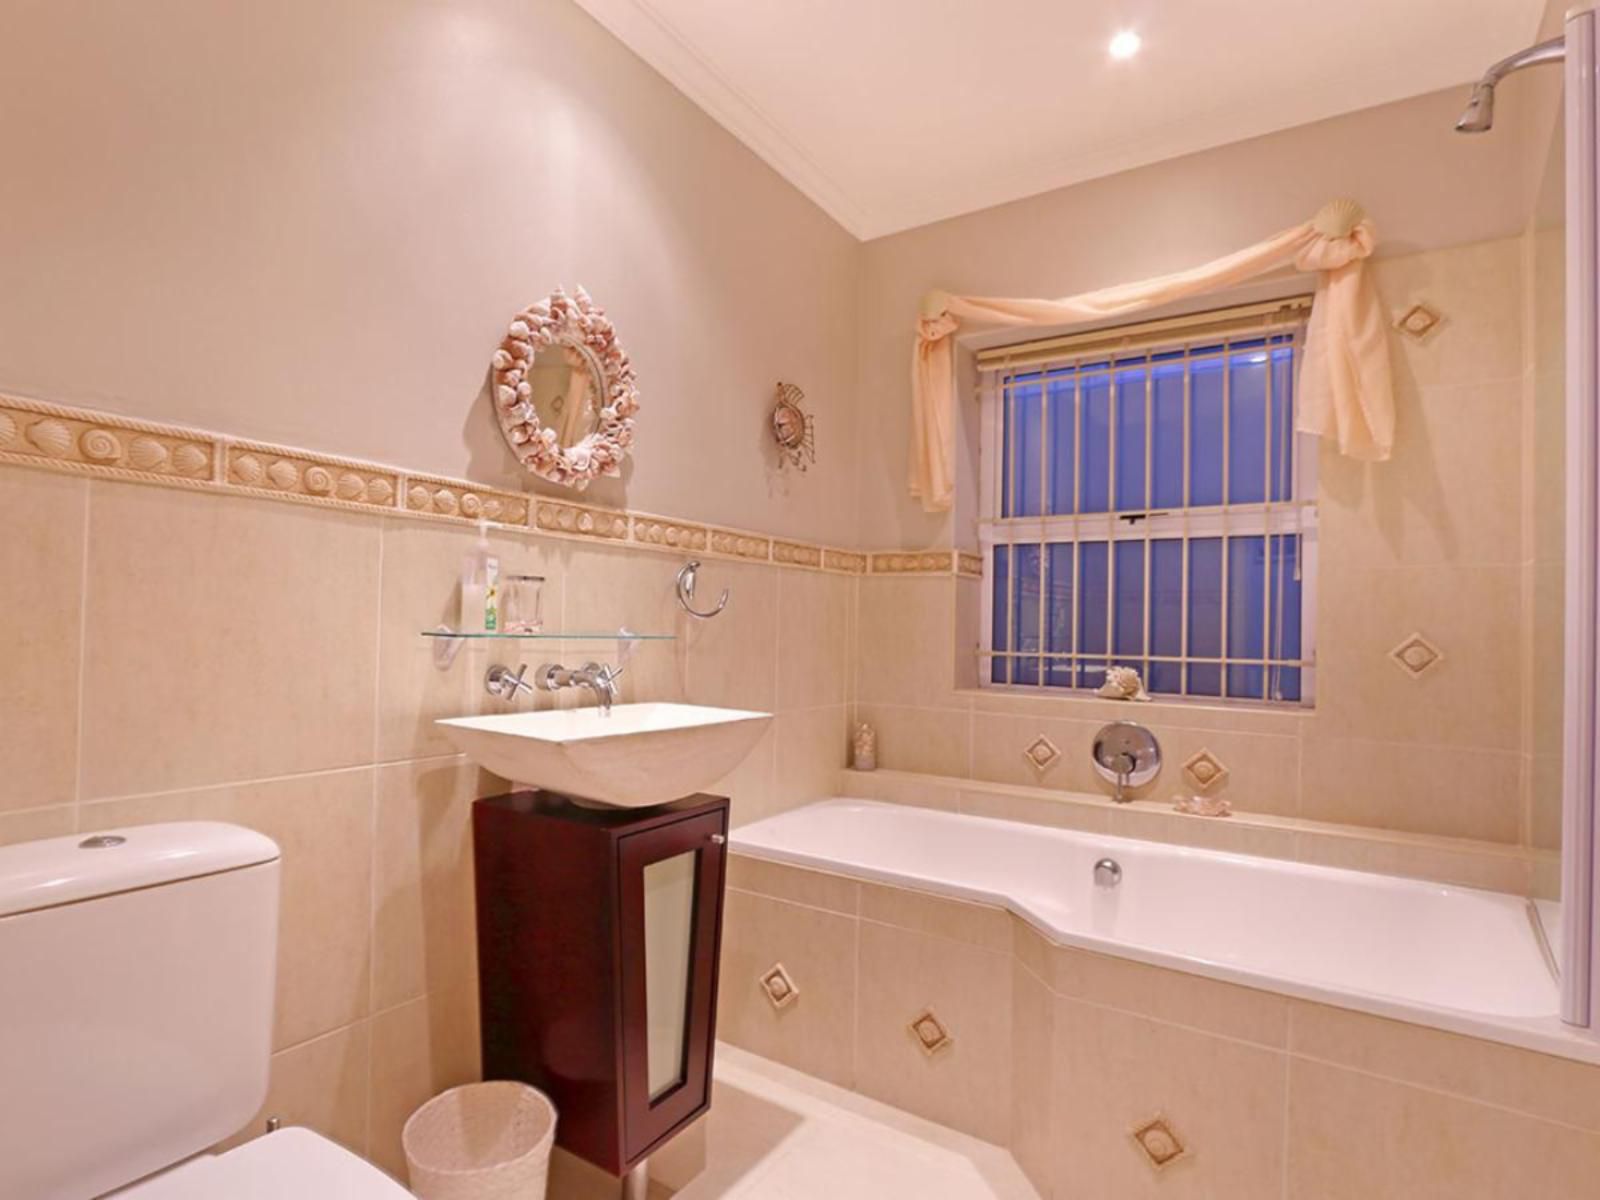 Bayview 30 By Hostagents Bloubergstrand Blouberg Western Cape South Africa Bathroom